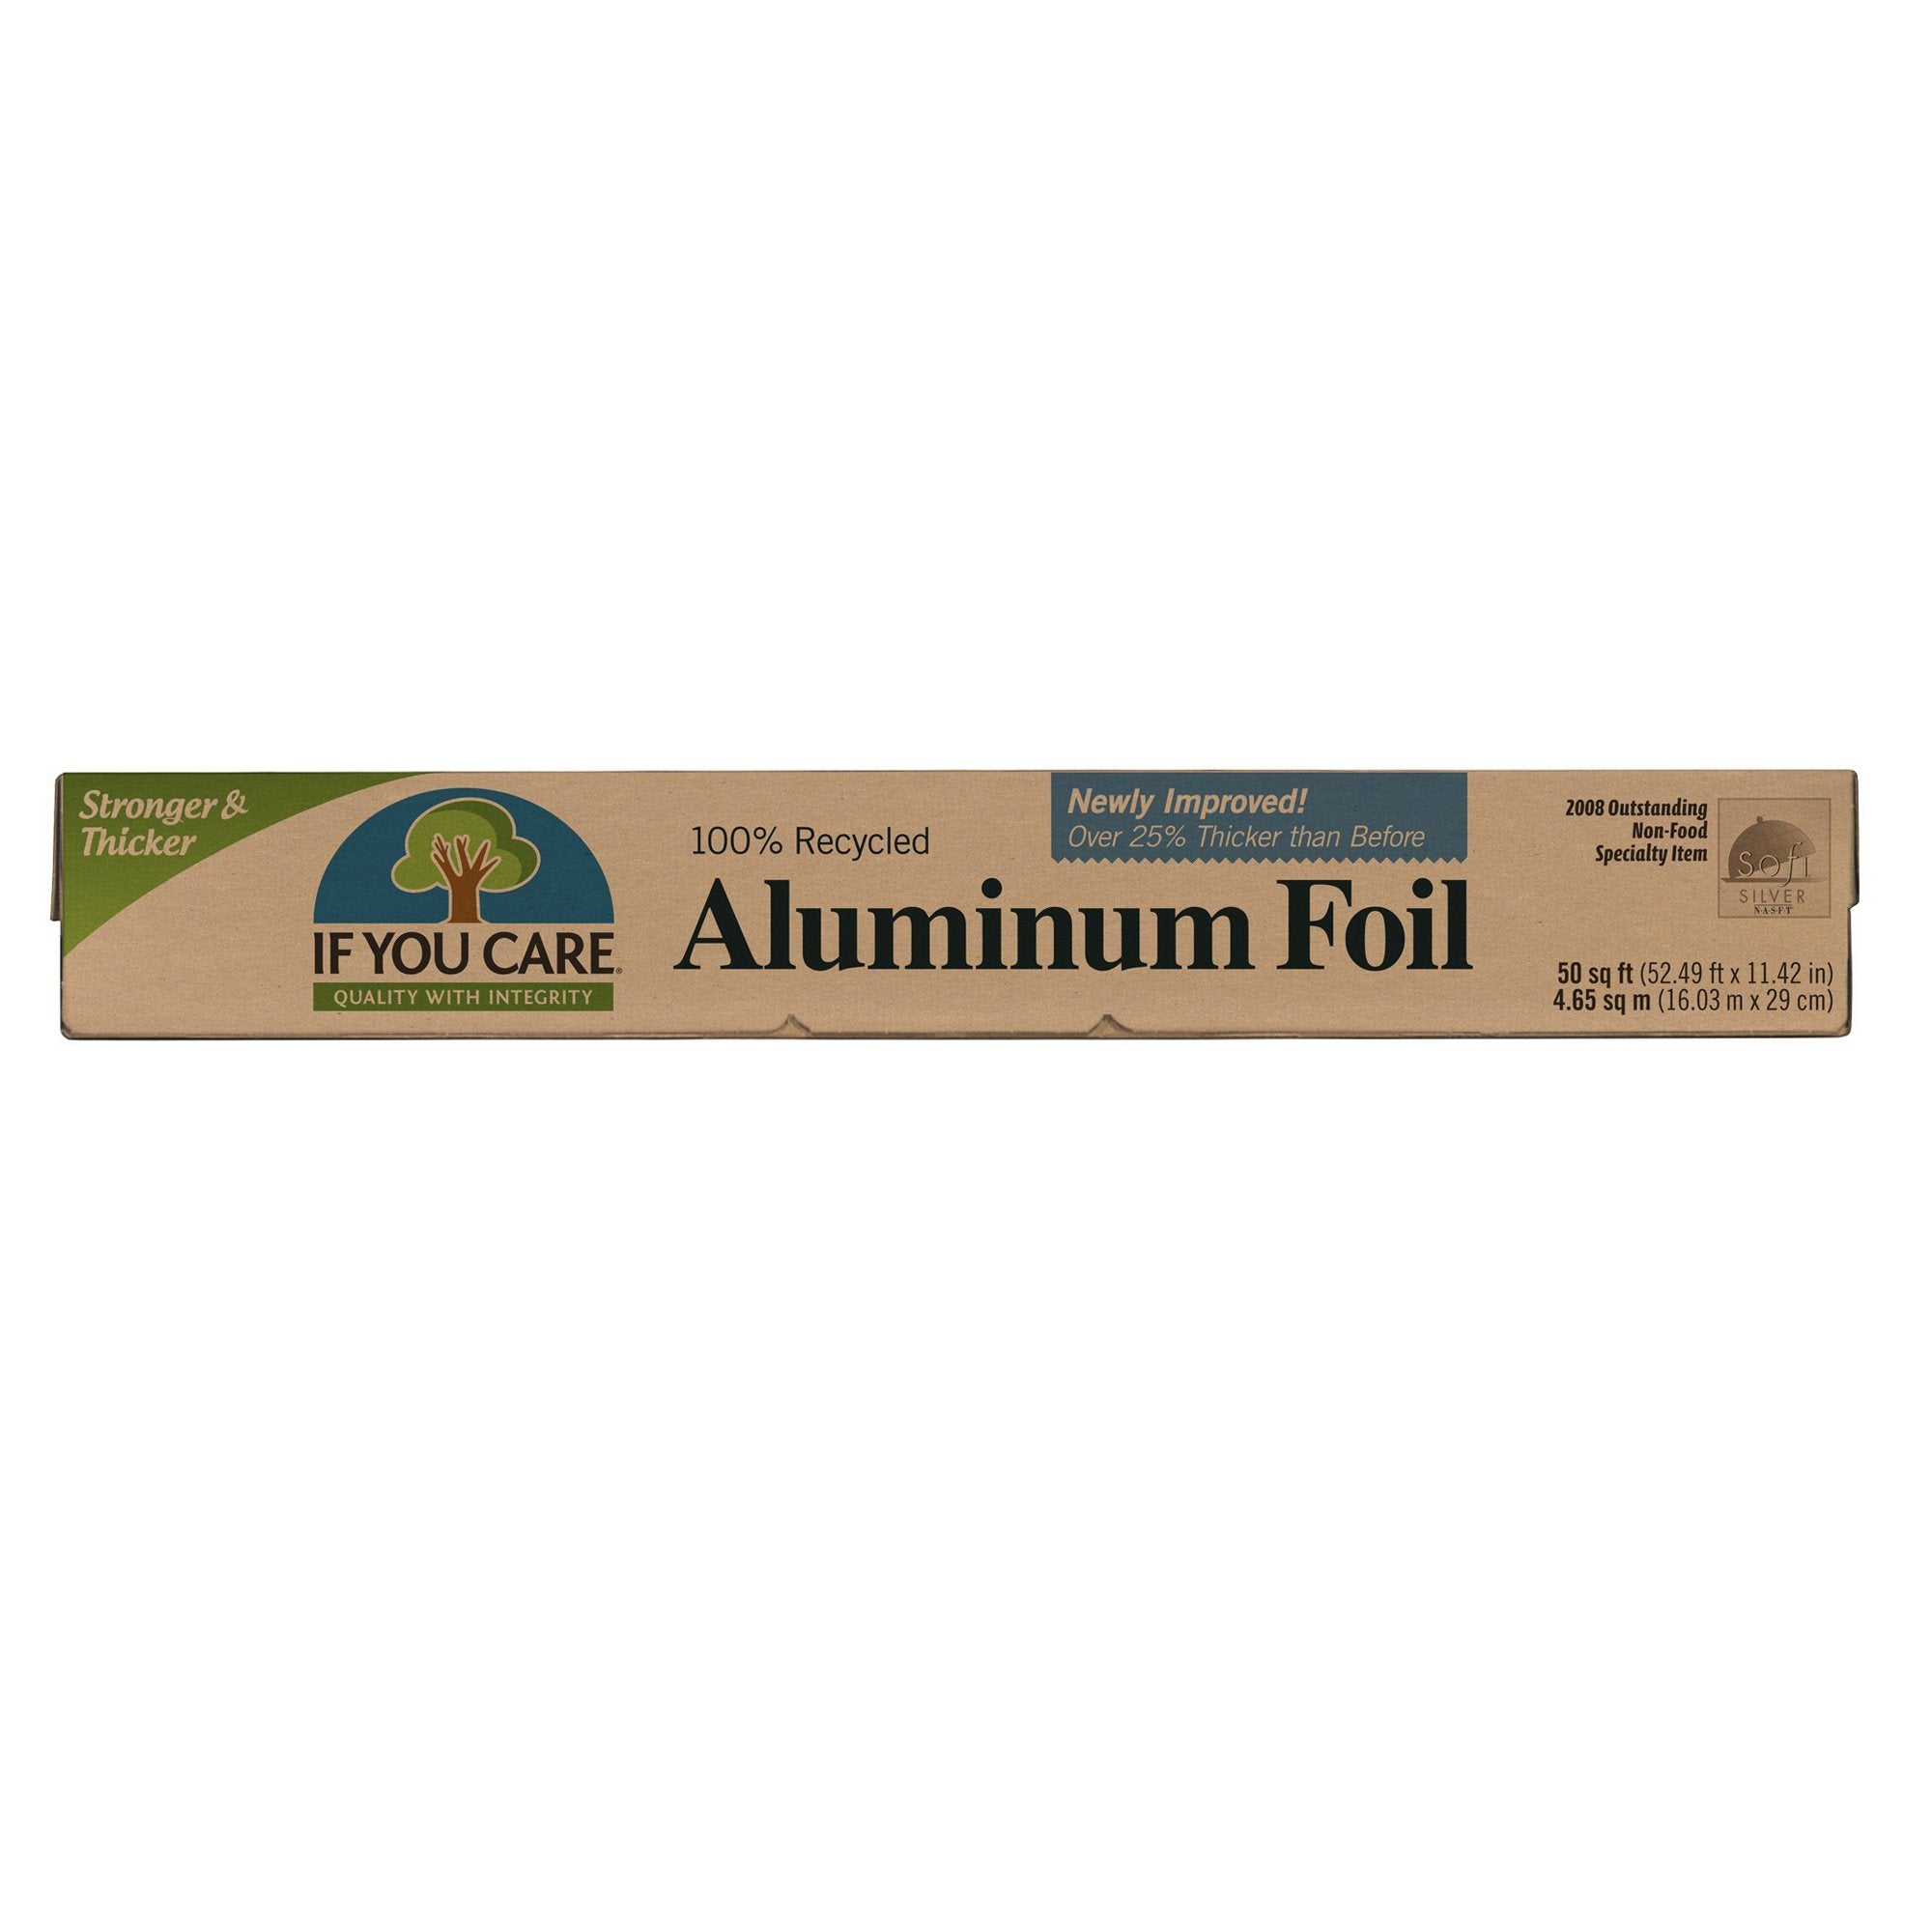 Here's How to Recycle Aluminum Foil Properly